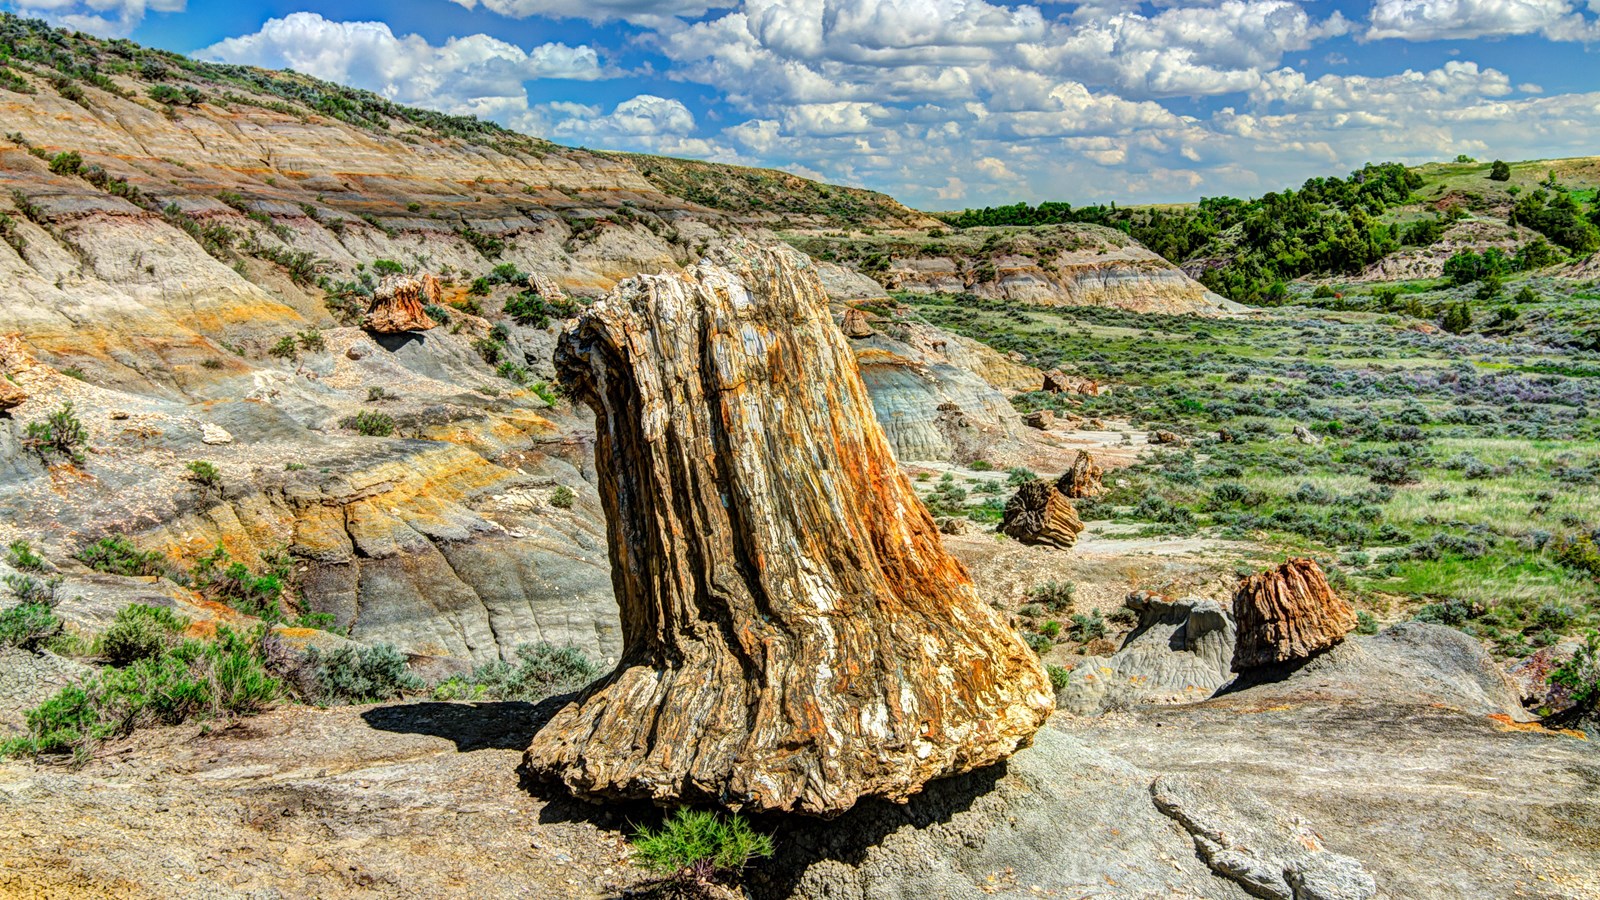 A sunny day in the badlands, petrified wood in the foreground stands at the edge of a valley.